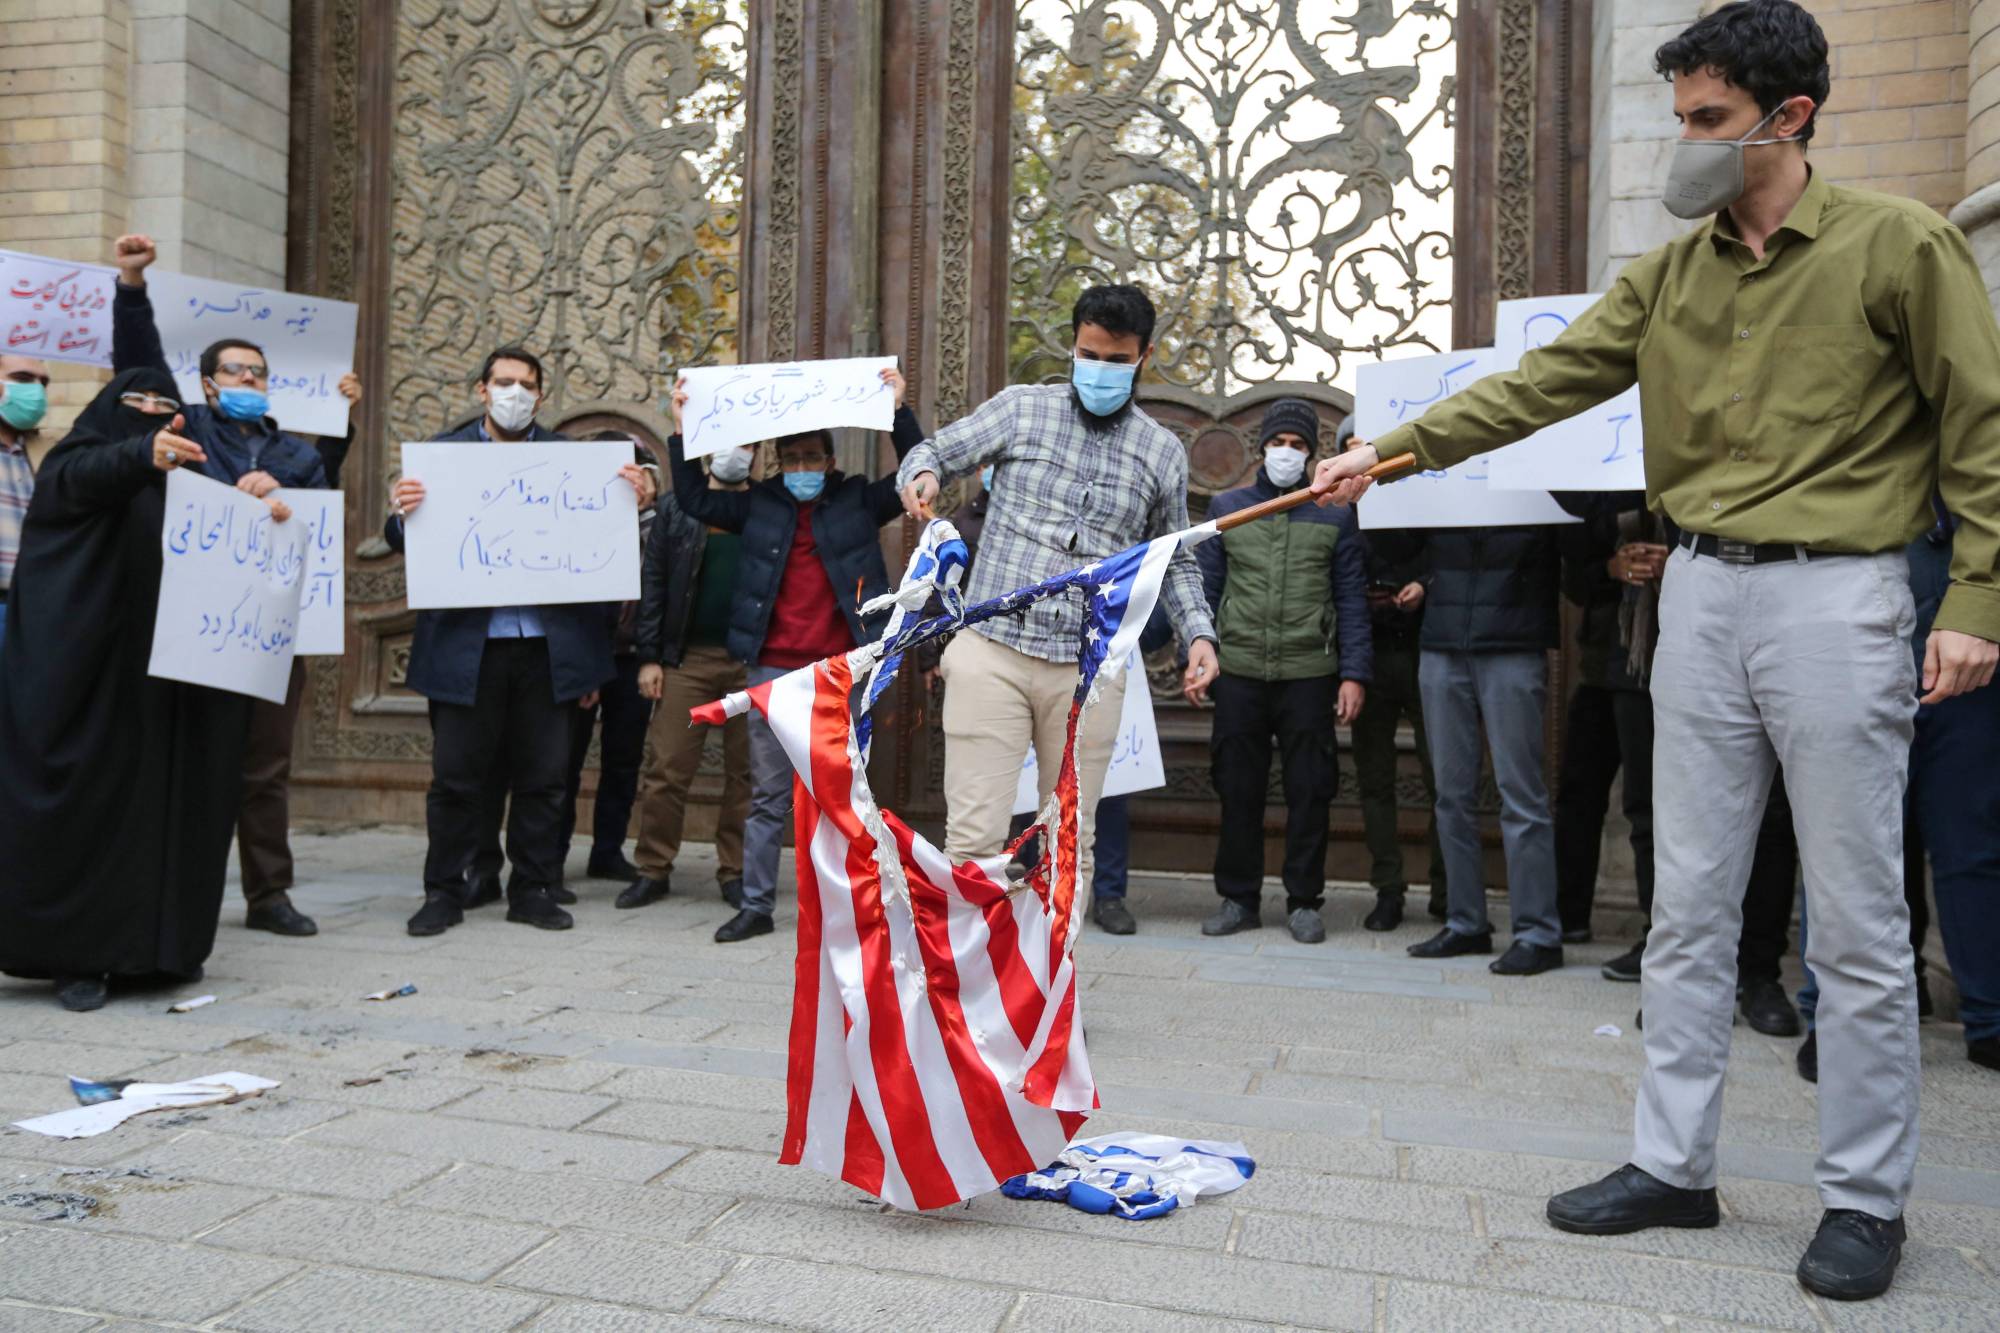 Students of Iran's Basij paramilitary force burn U.S. and Israeli flags in front of the foreign ministry in Tehran on Saturday to protest the killing of prominent nuclear scientist Mohsen Fakhrizadeh. | AFP-JIJI  